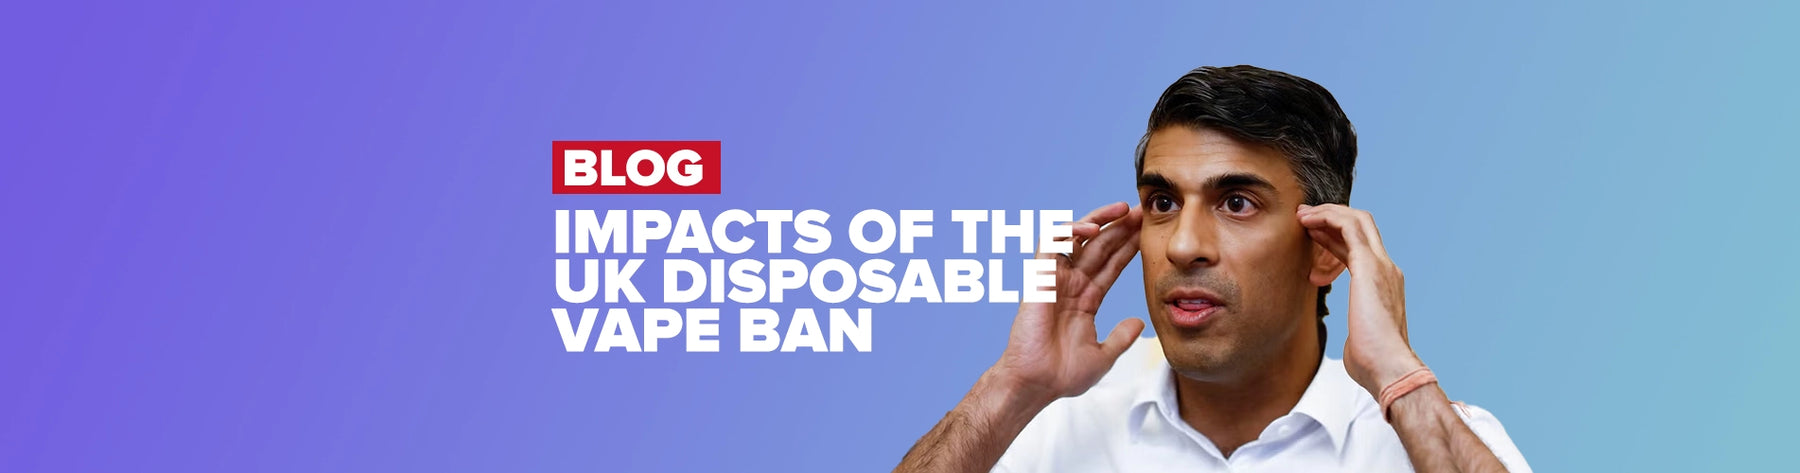 Disposable Vape ban in the UK: Impacts and Alternatives